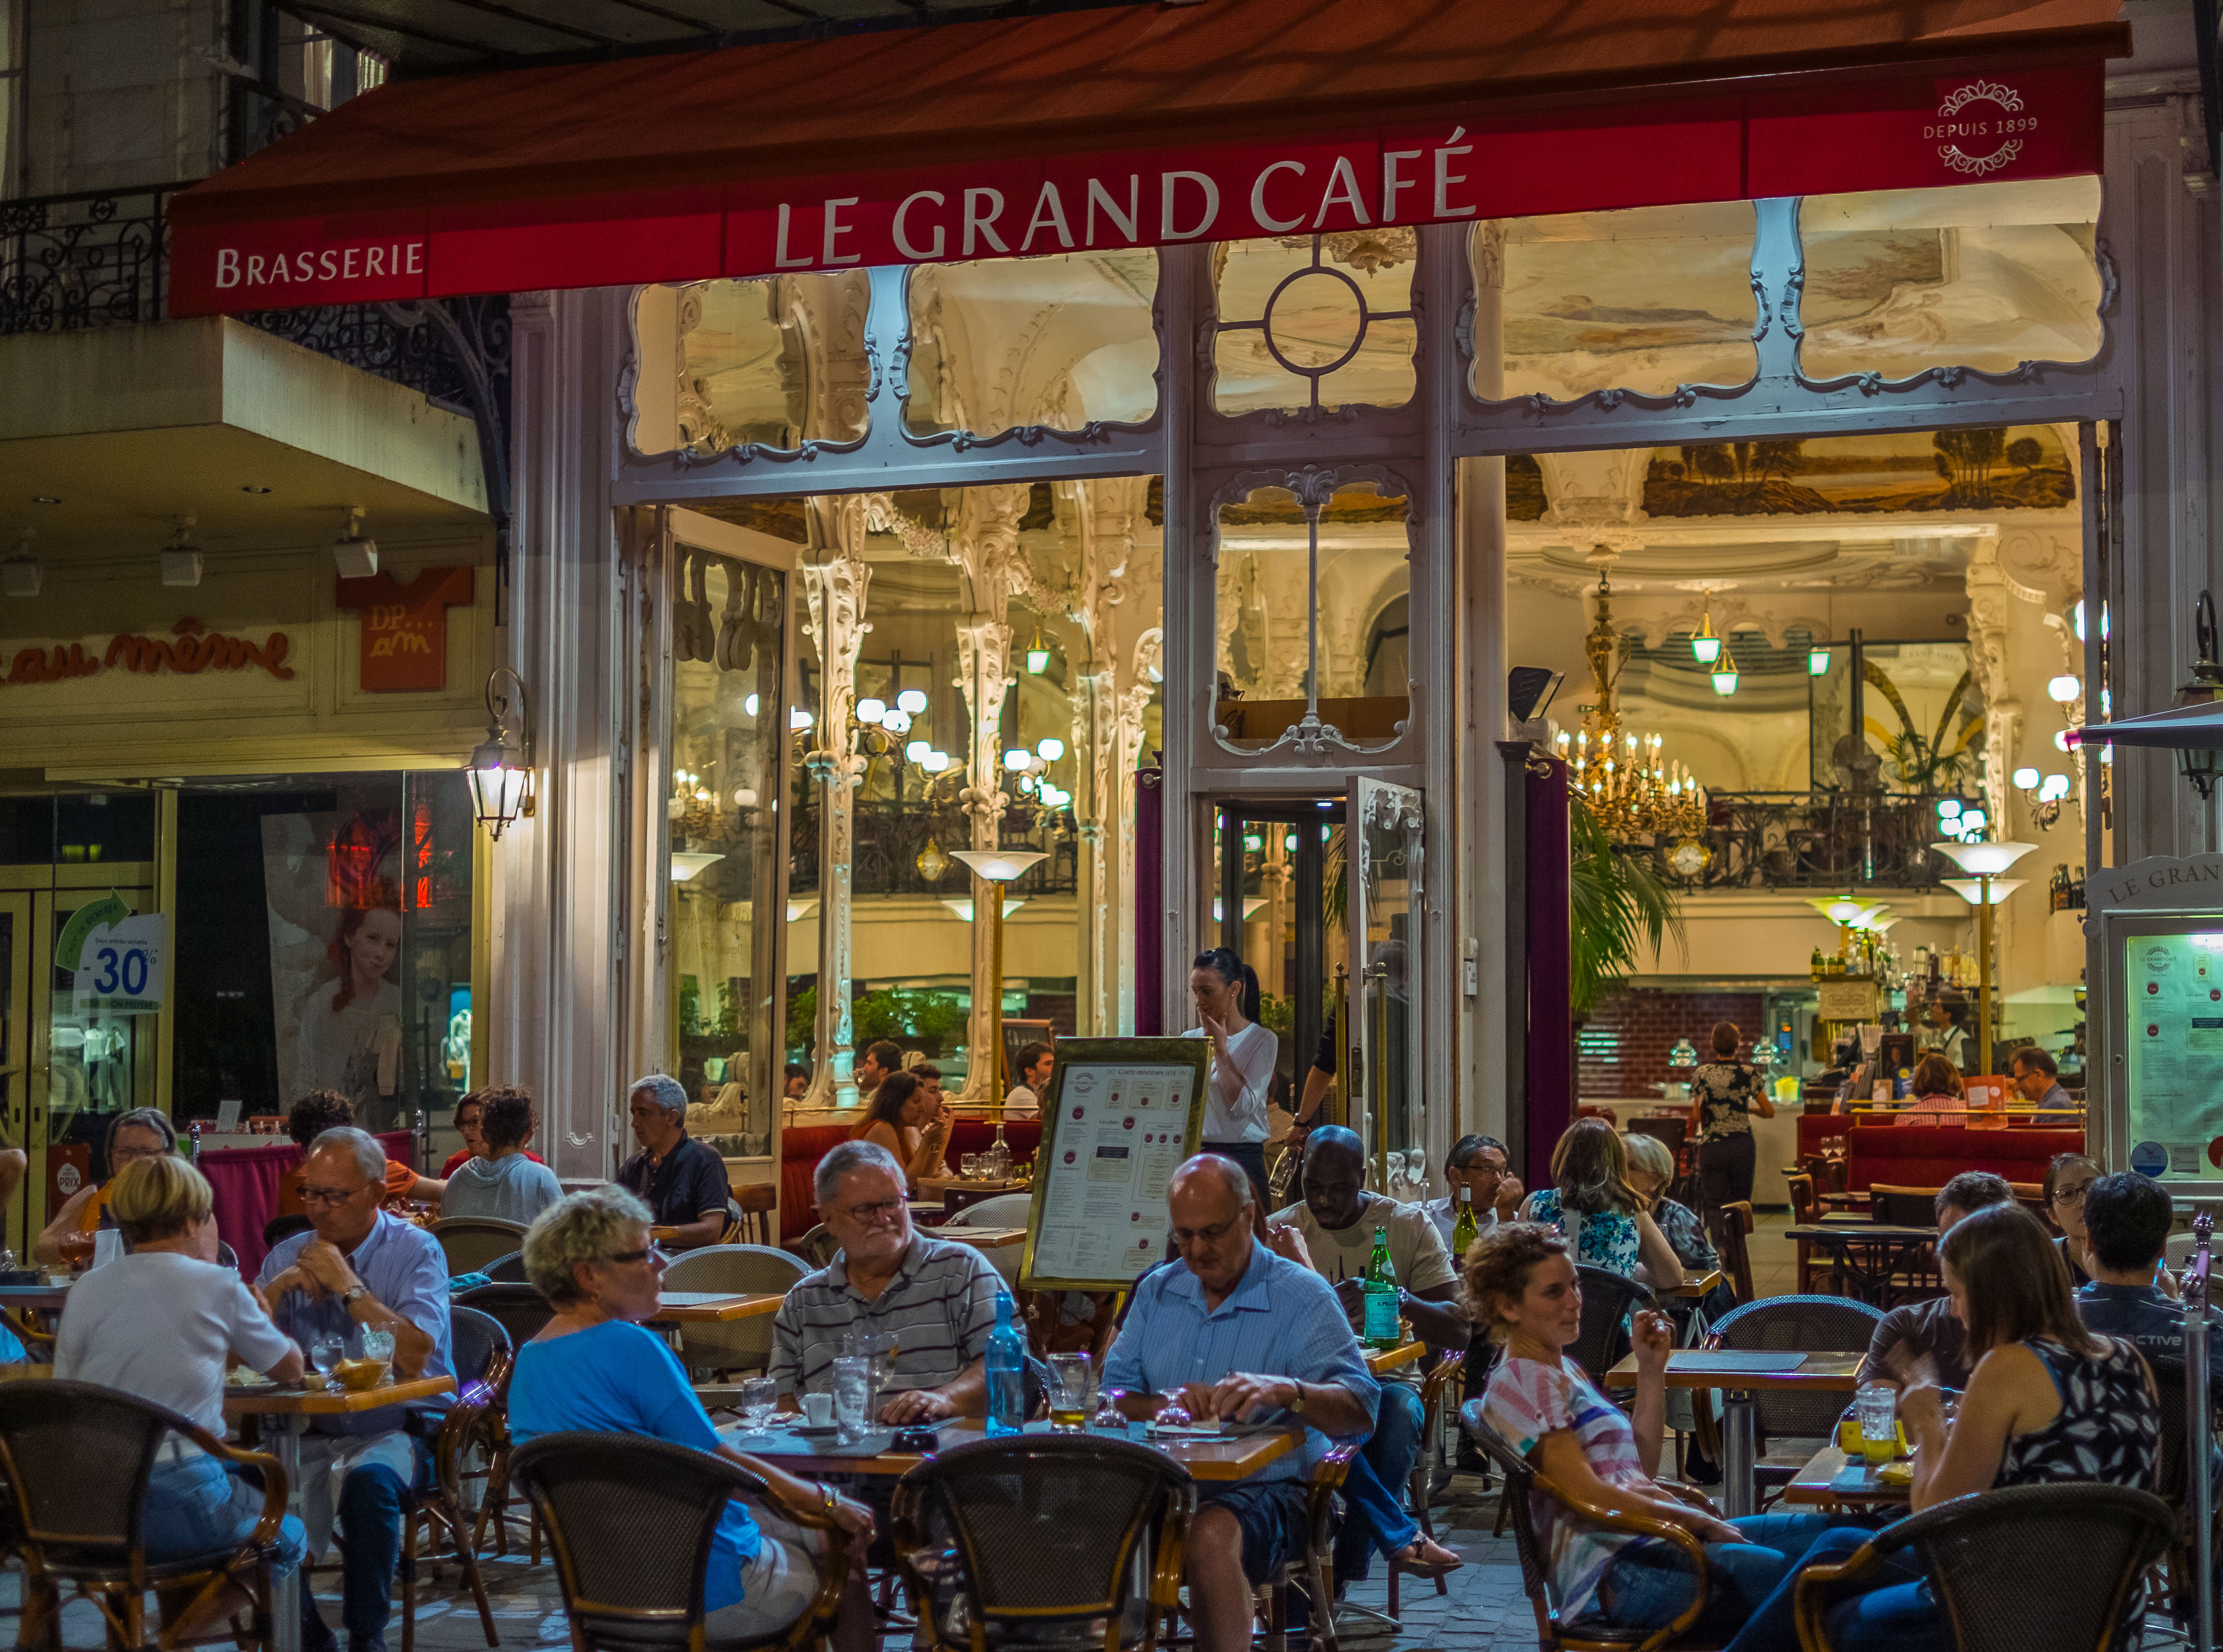 Le Grand Cafe, another place to enjoy an evening in Moulins